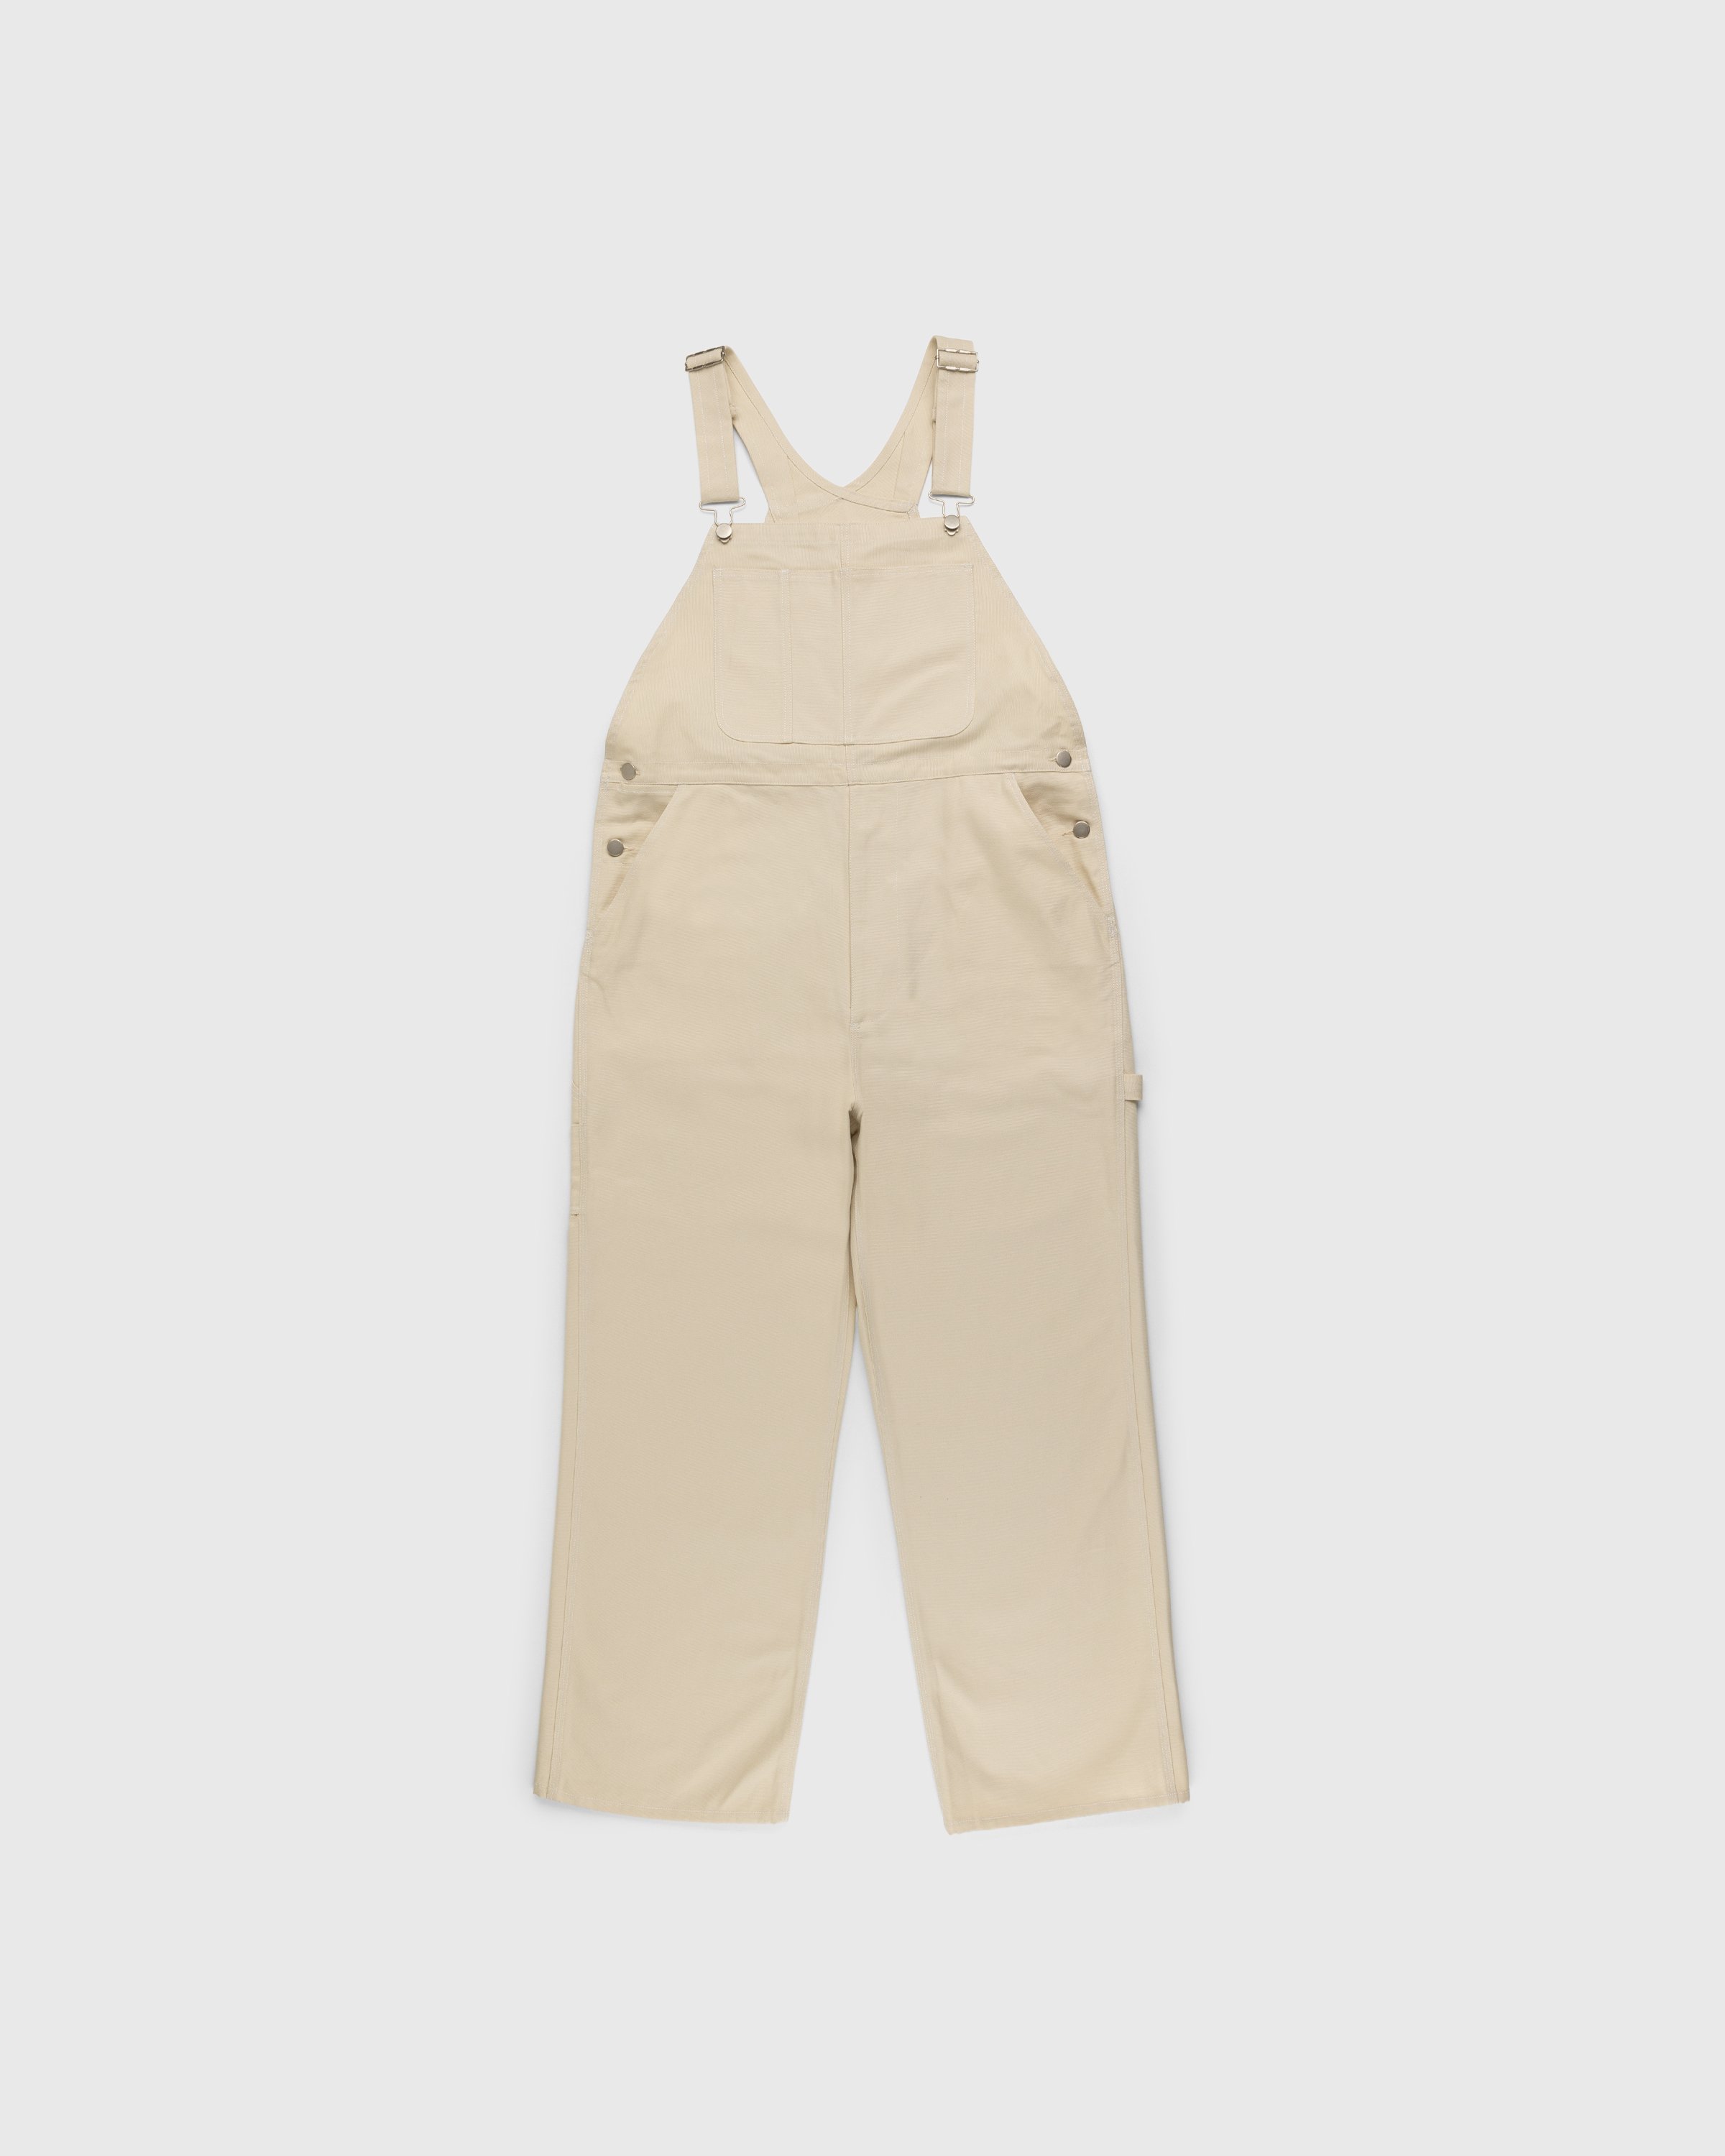 RUF x Highsnobiety - Cotton Overalls Natural - Clothing - Beige - Image 2